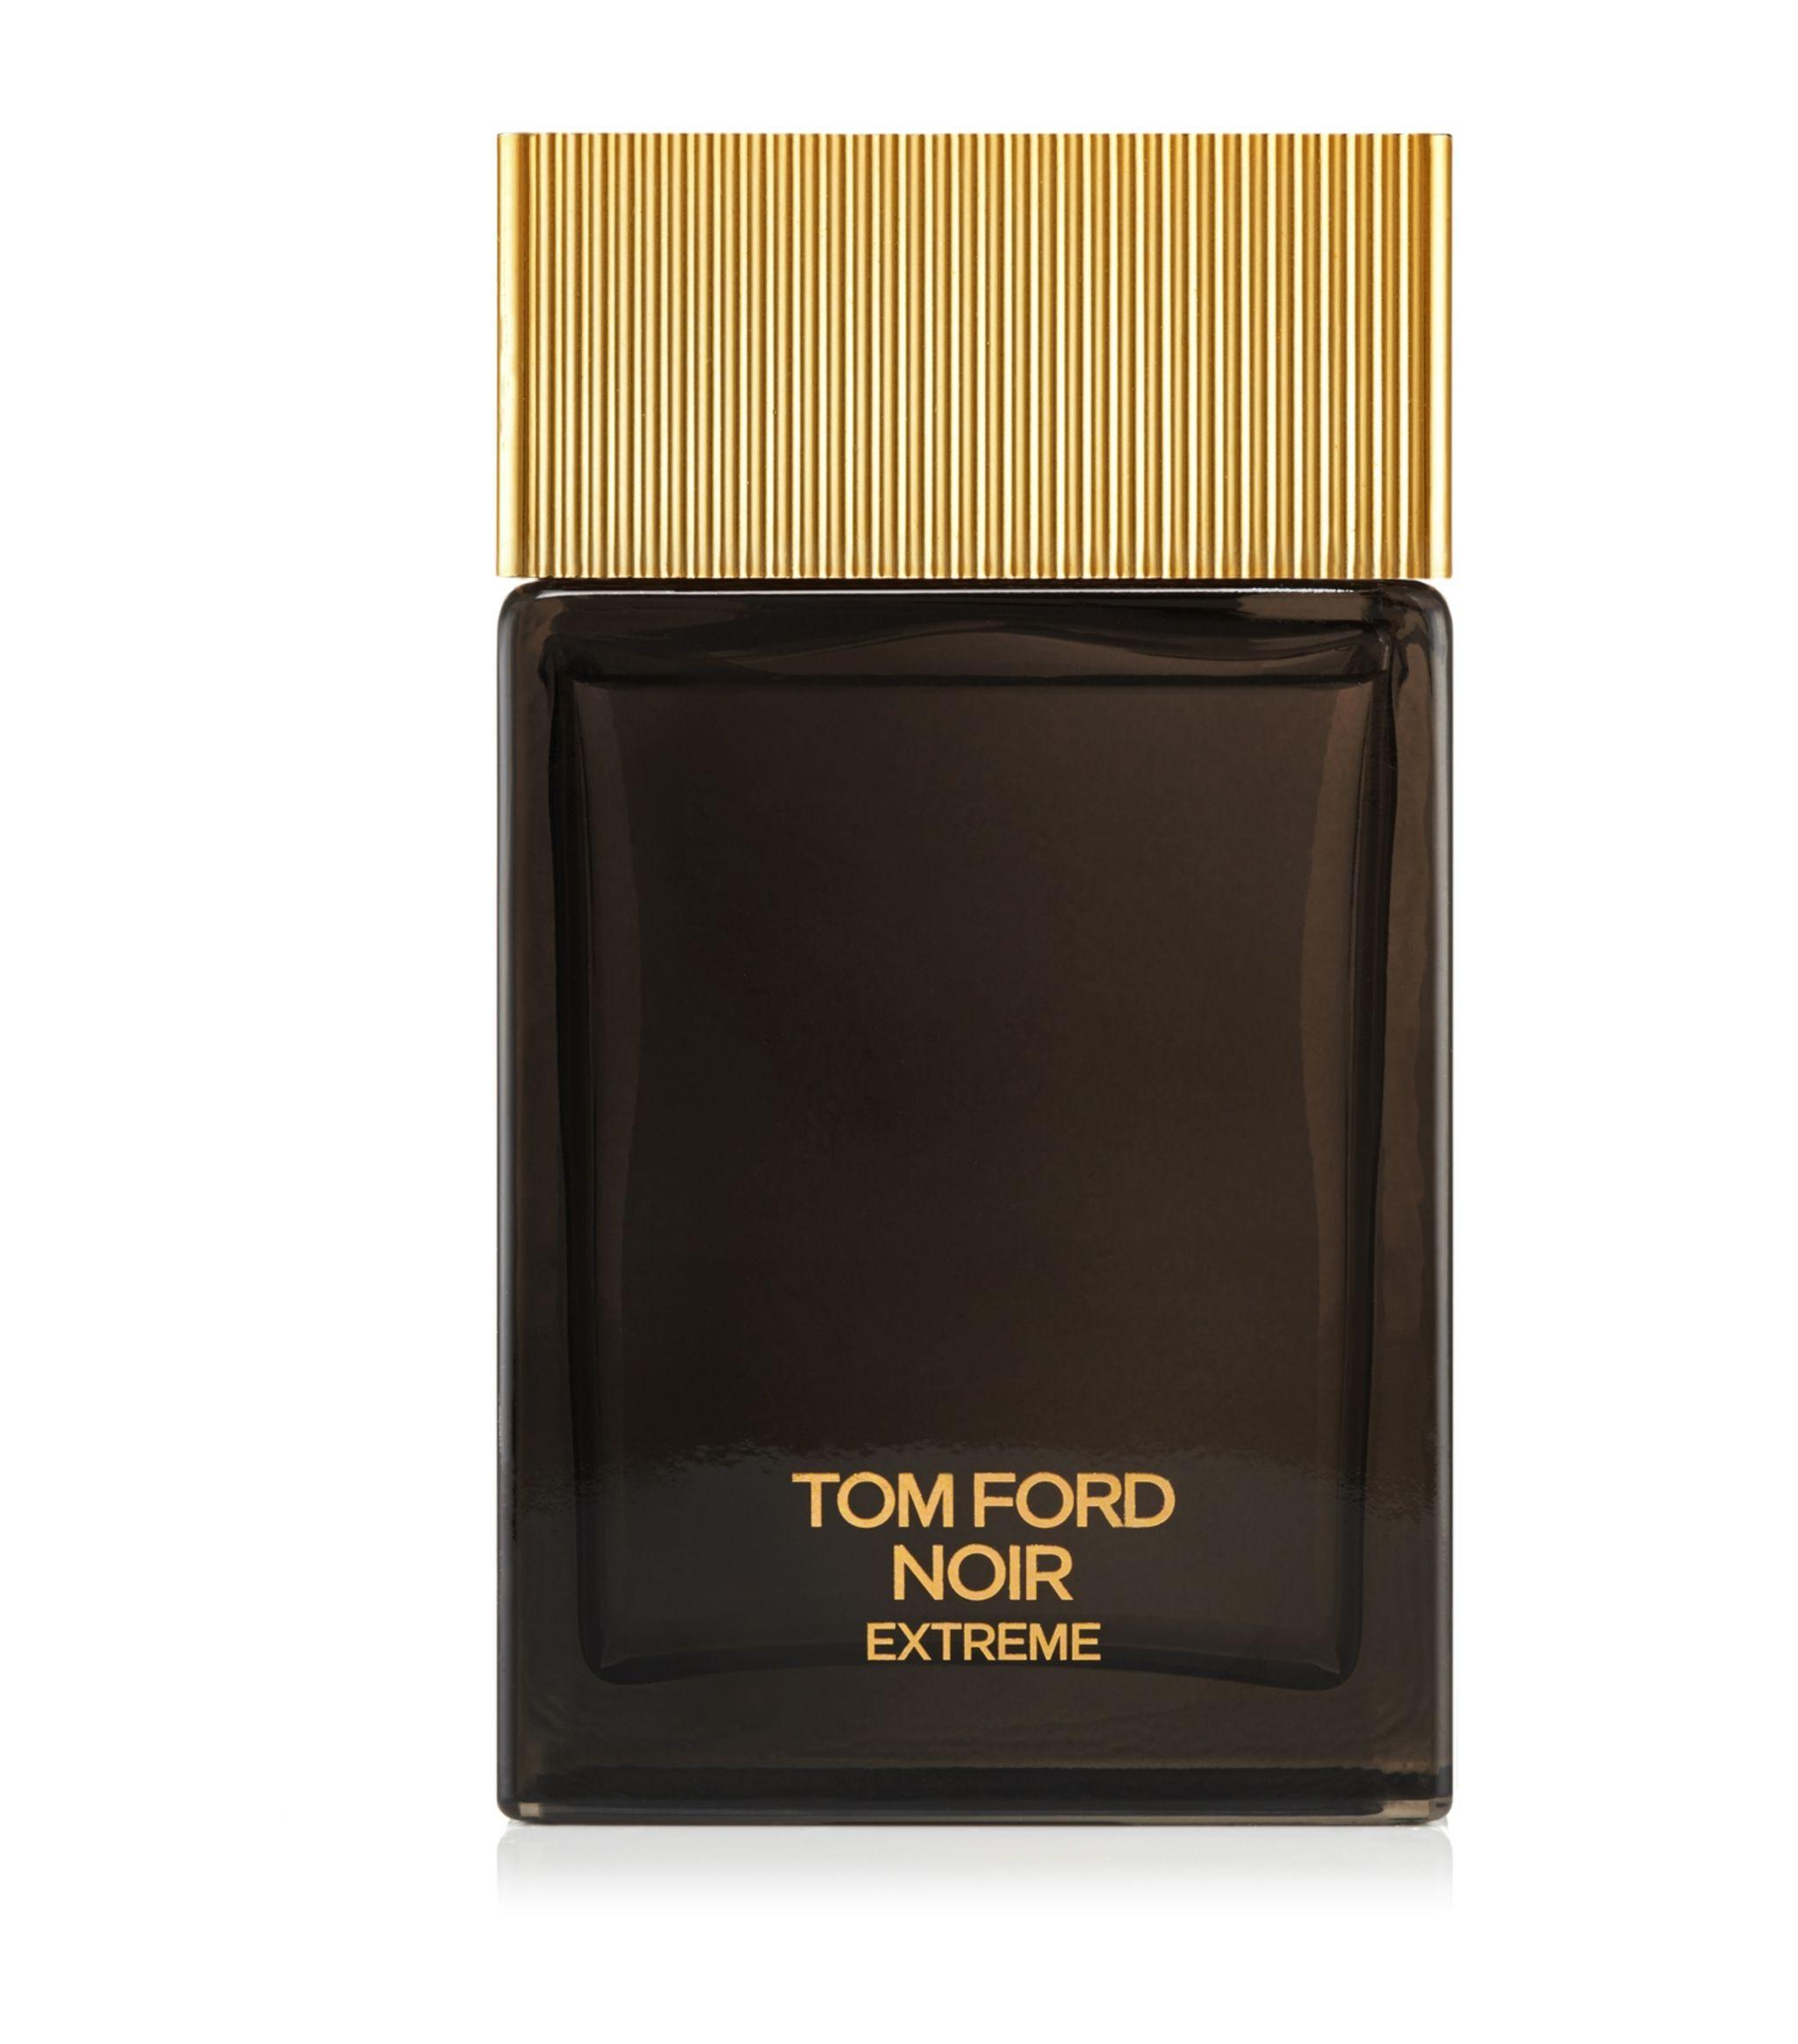 Tom Ford Noir Extreme (M) Edp 100ml - undefined - TheFirstScent -Hong Kong